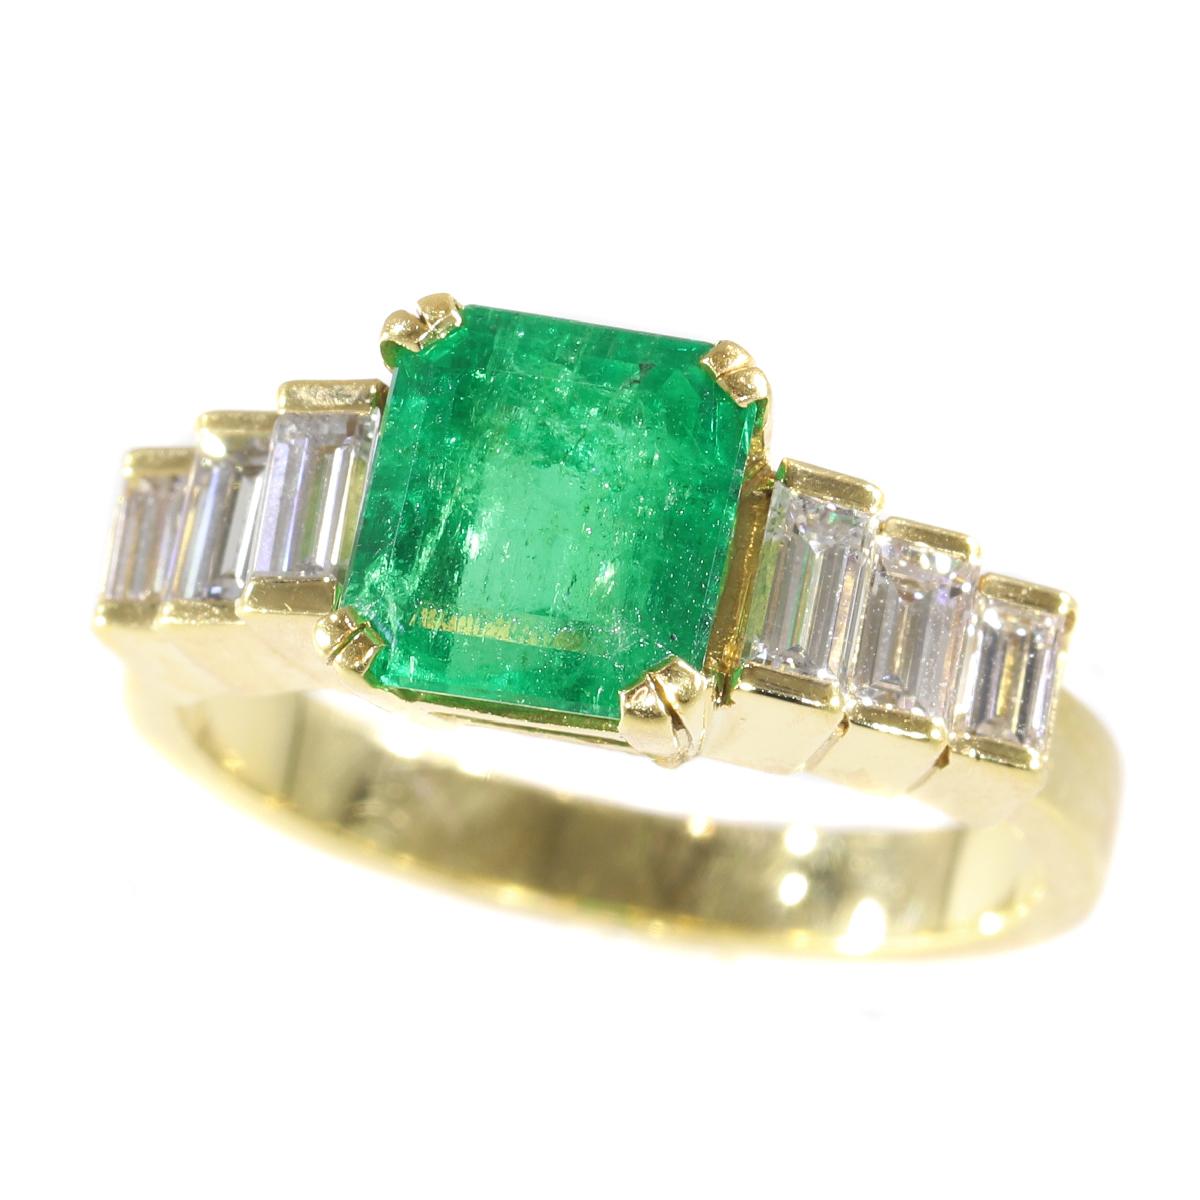 This 18K yellow gold French estate ring from the 1980's seems to have emerged from an exotic cascade with a grand square cut Colombian emerald of superb quality arising between six terraced baguette cut diamonds. With this gemmed force of nature